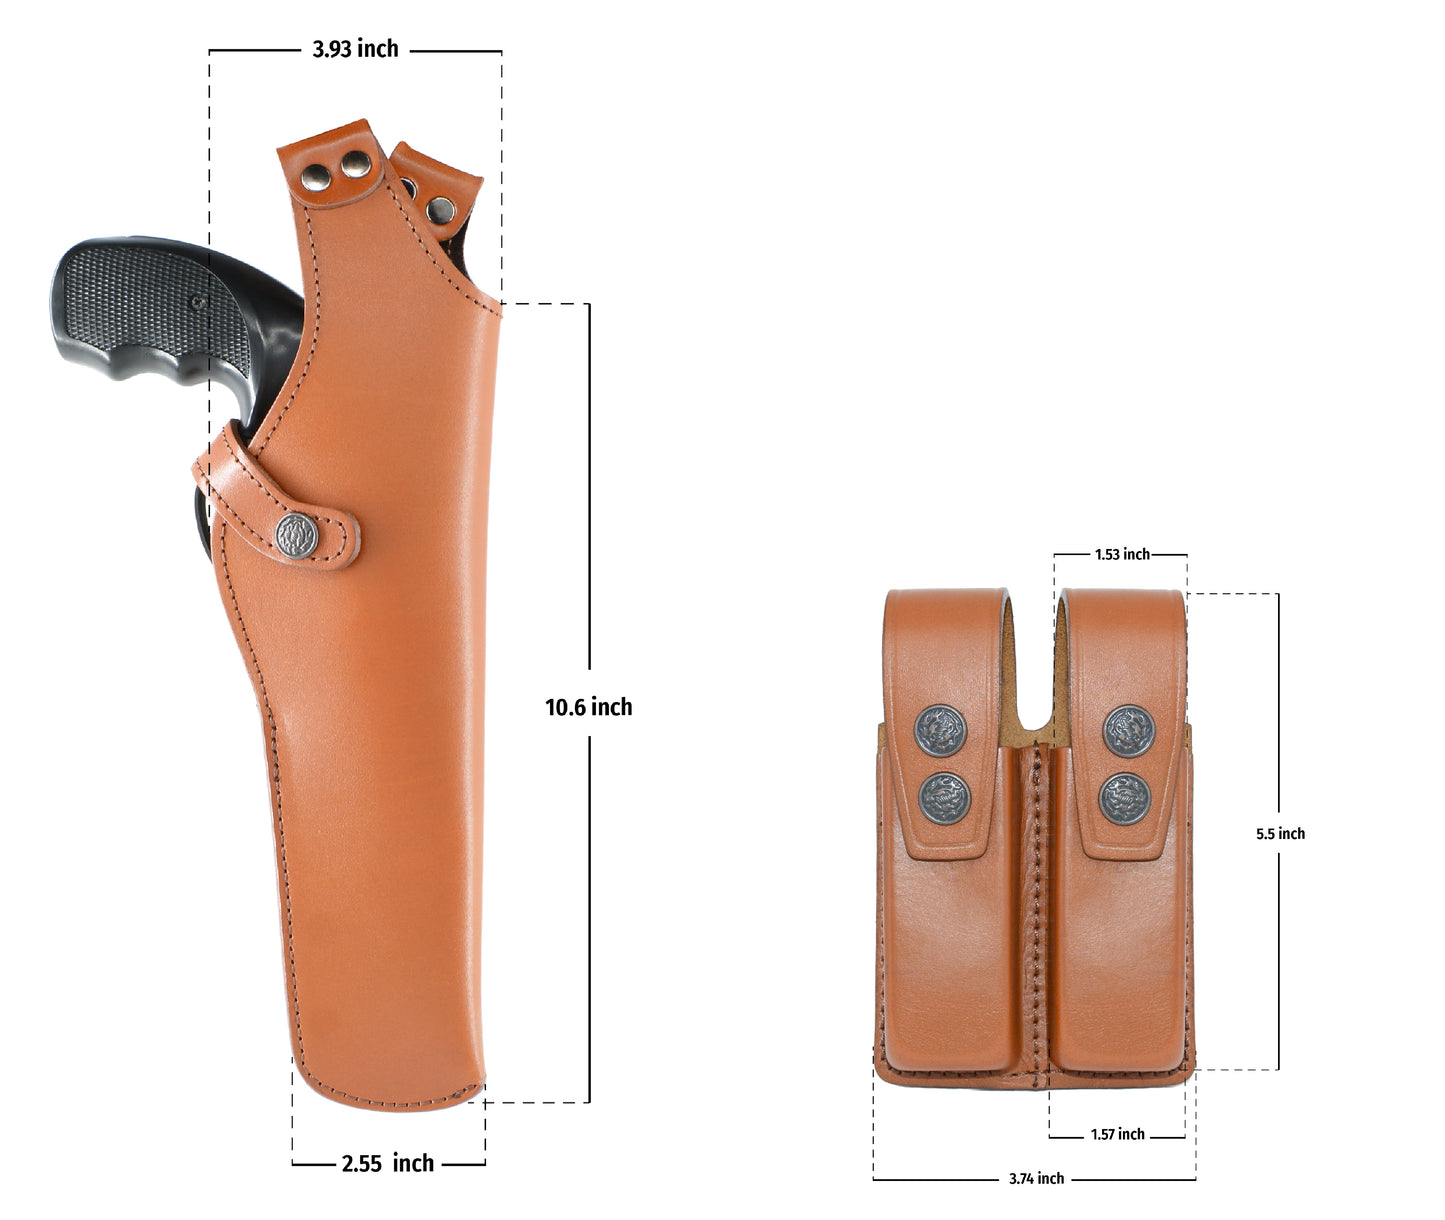 K45206 Leather Vertical Shoulder Holster with Soft Fabric Interior Lining RH Double Magazine Pouch for Beretta CZ 75 Ruger Browning HP Sig Sauer P226